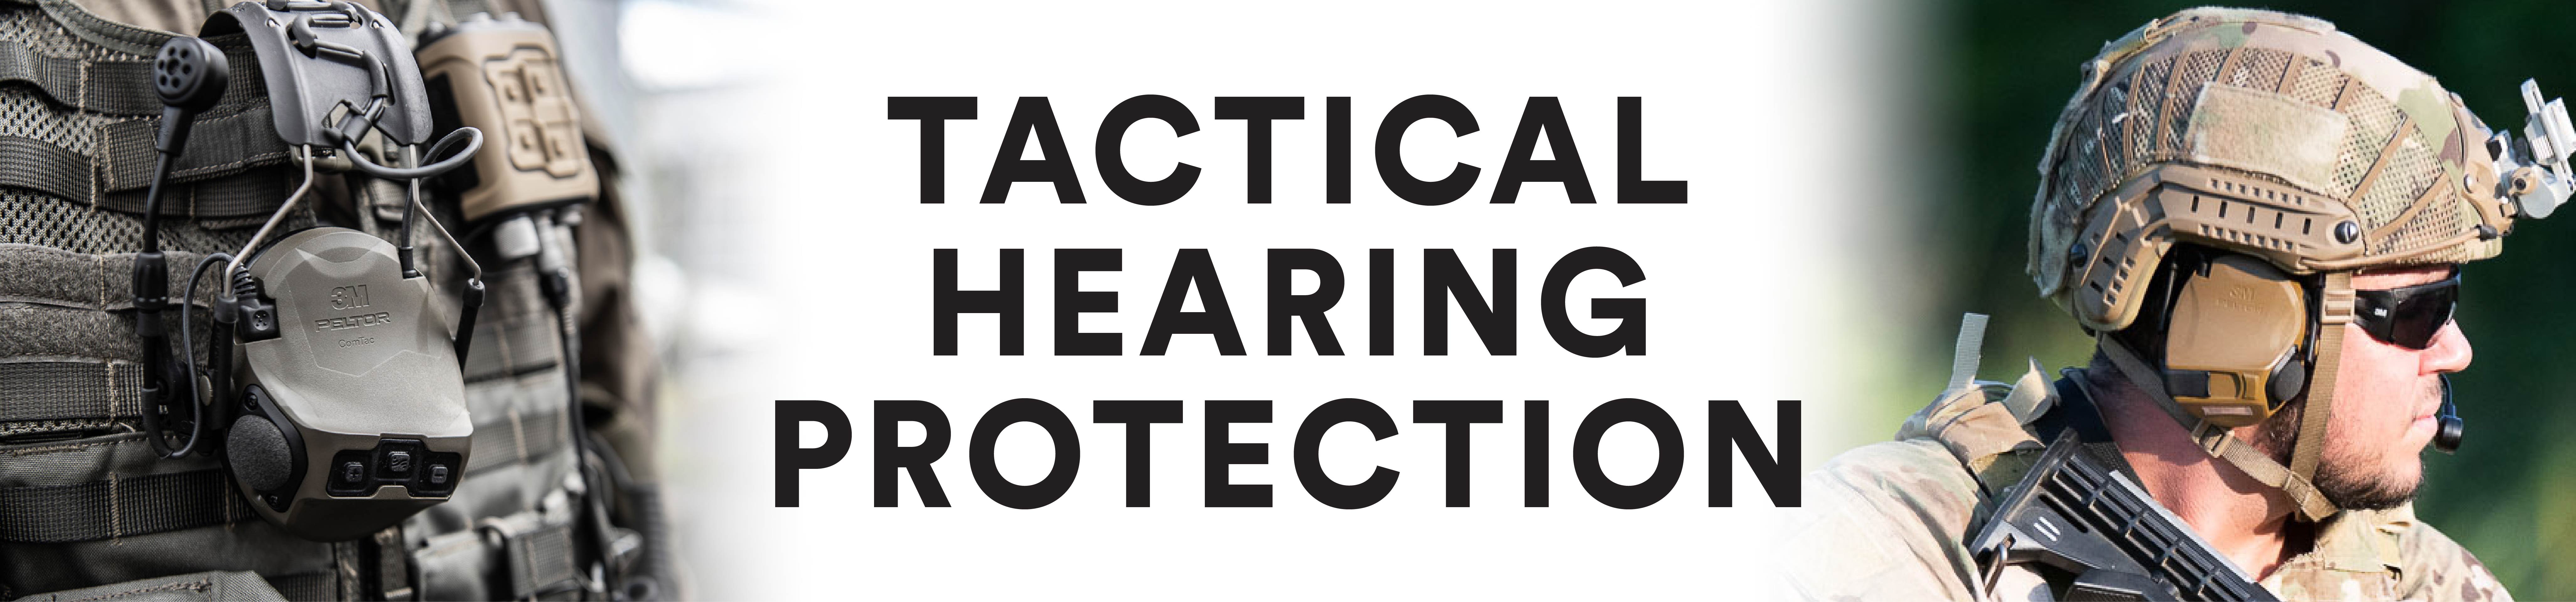 Tactical Hearing Protection